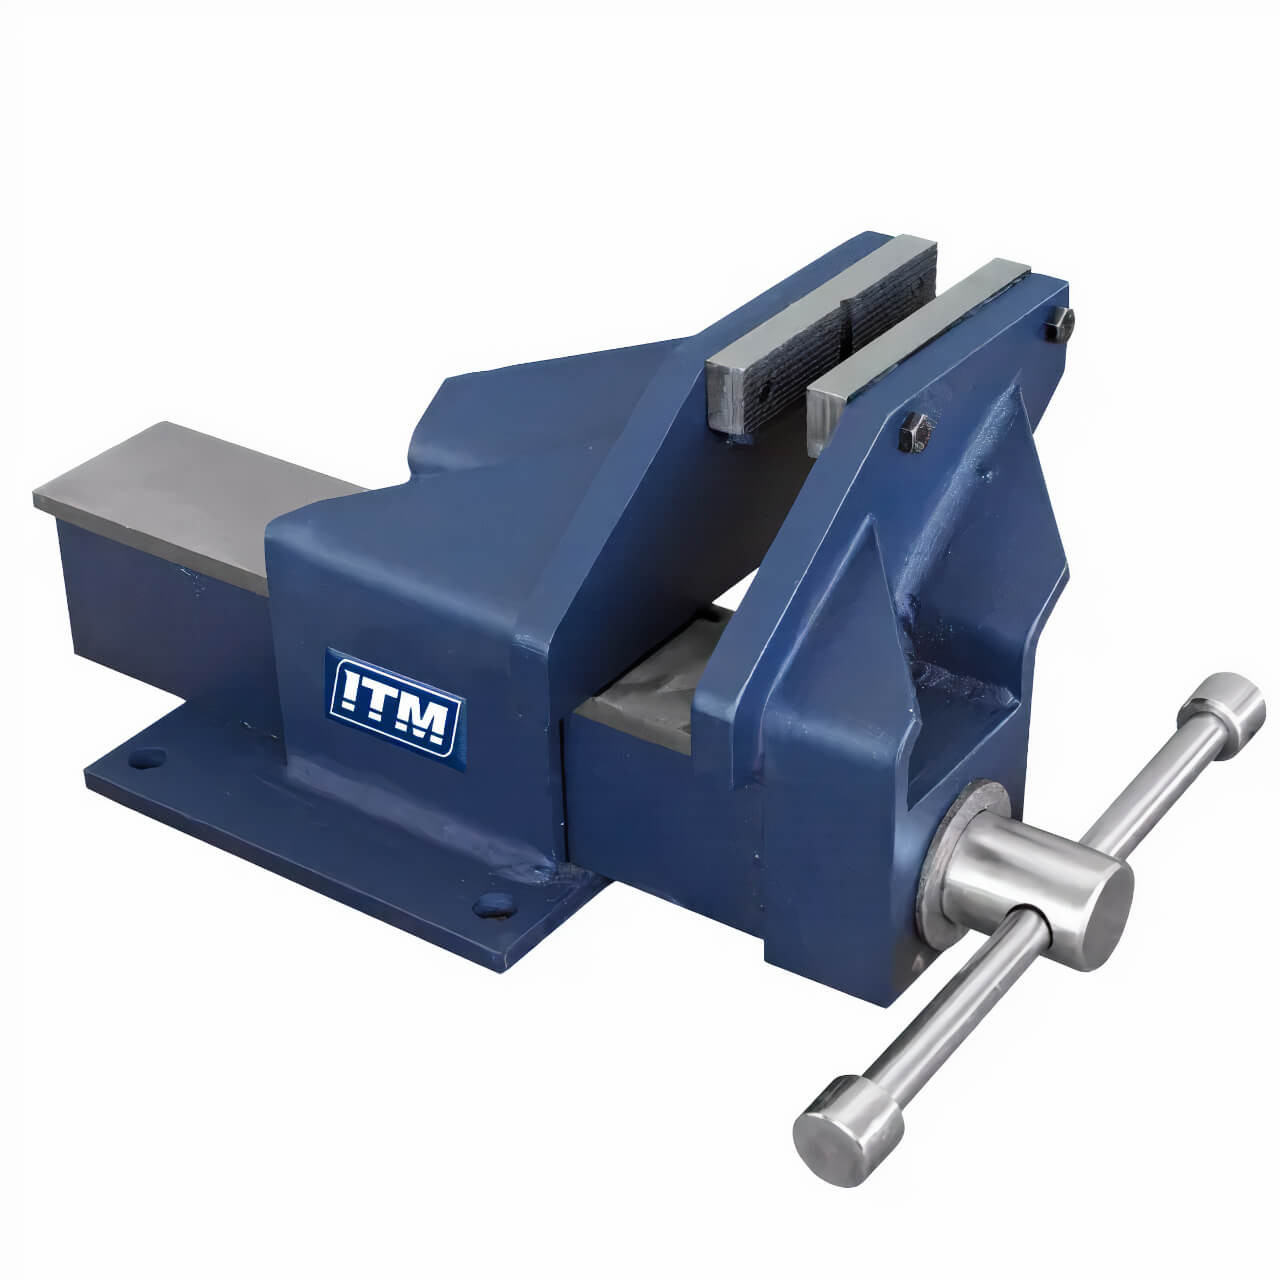 Trademaster Fabricated Steel Bench Vice Offset Jaw 150mm